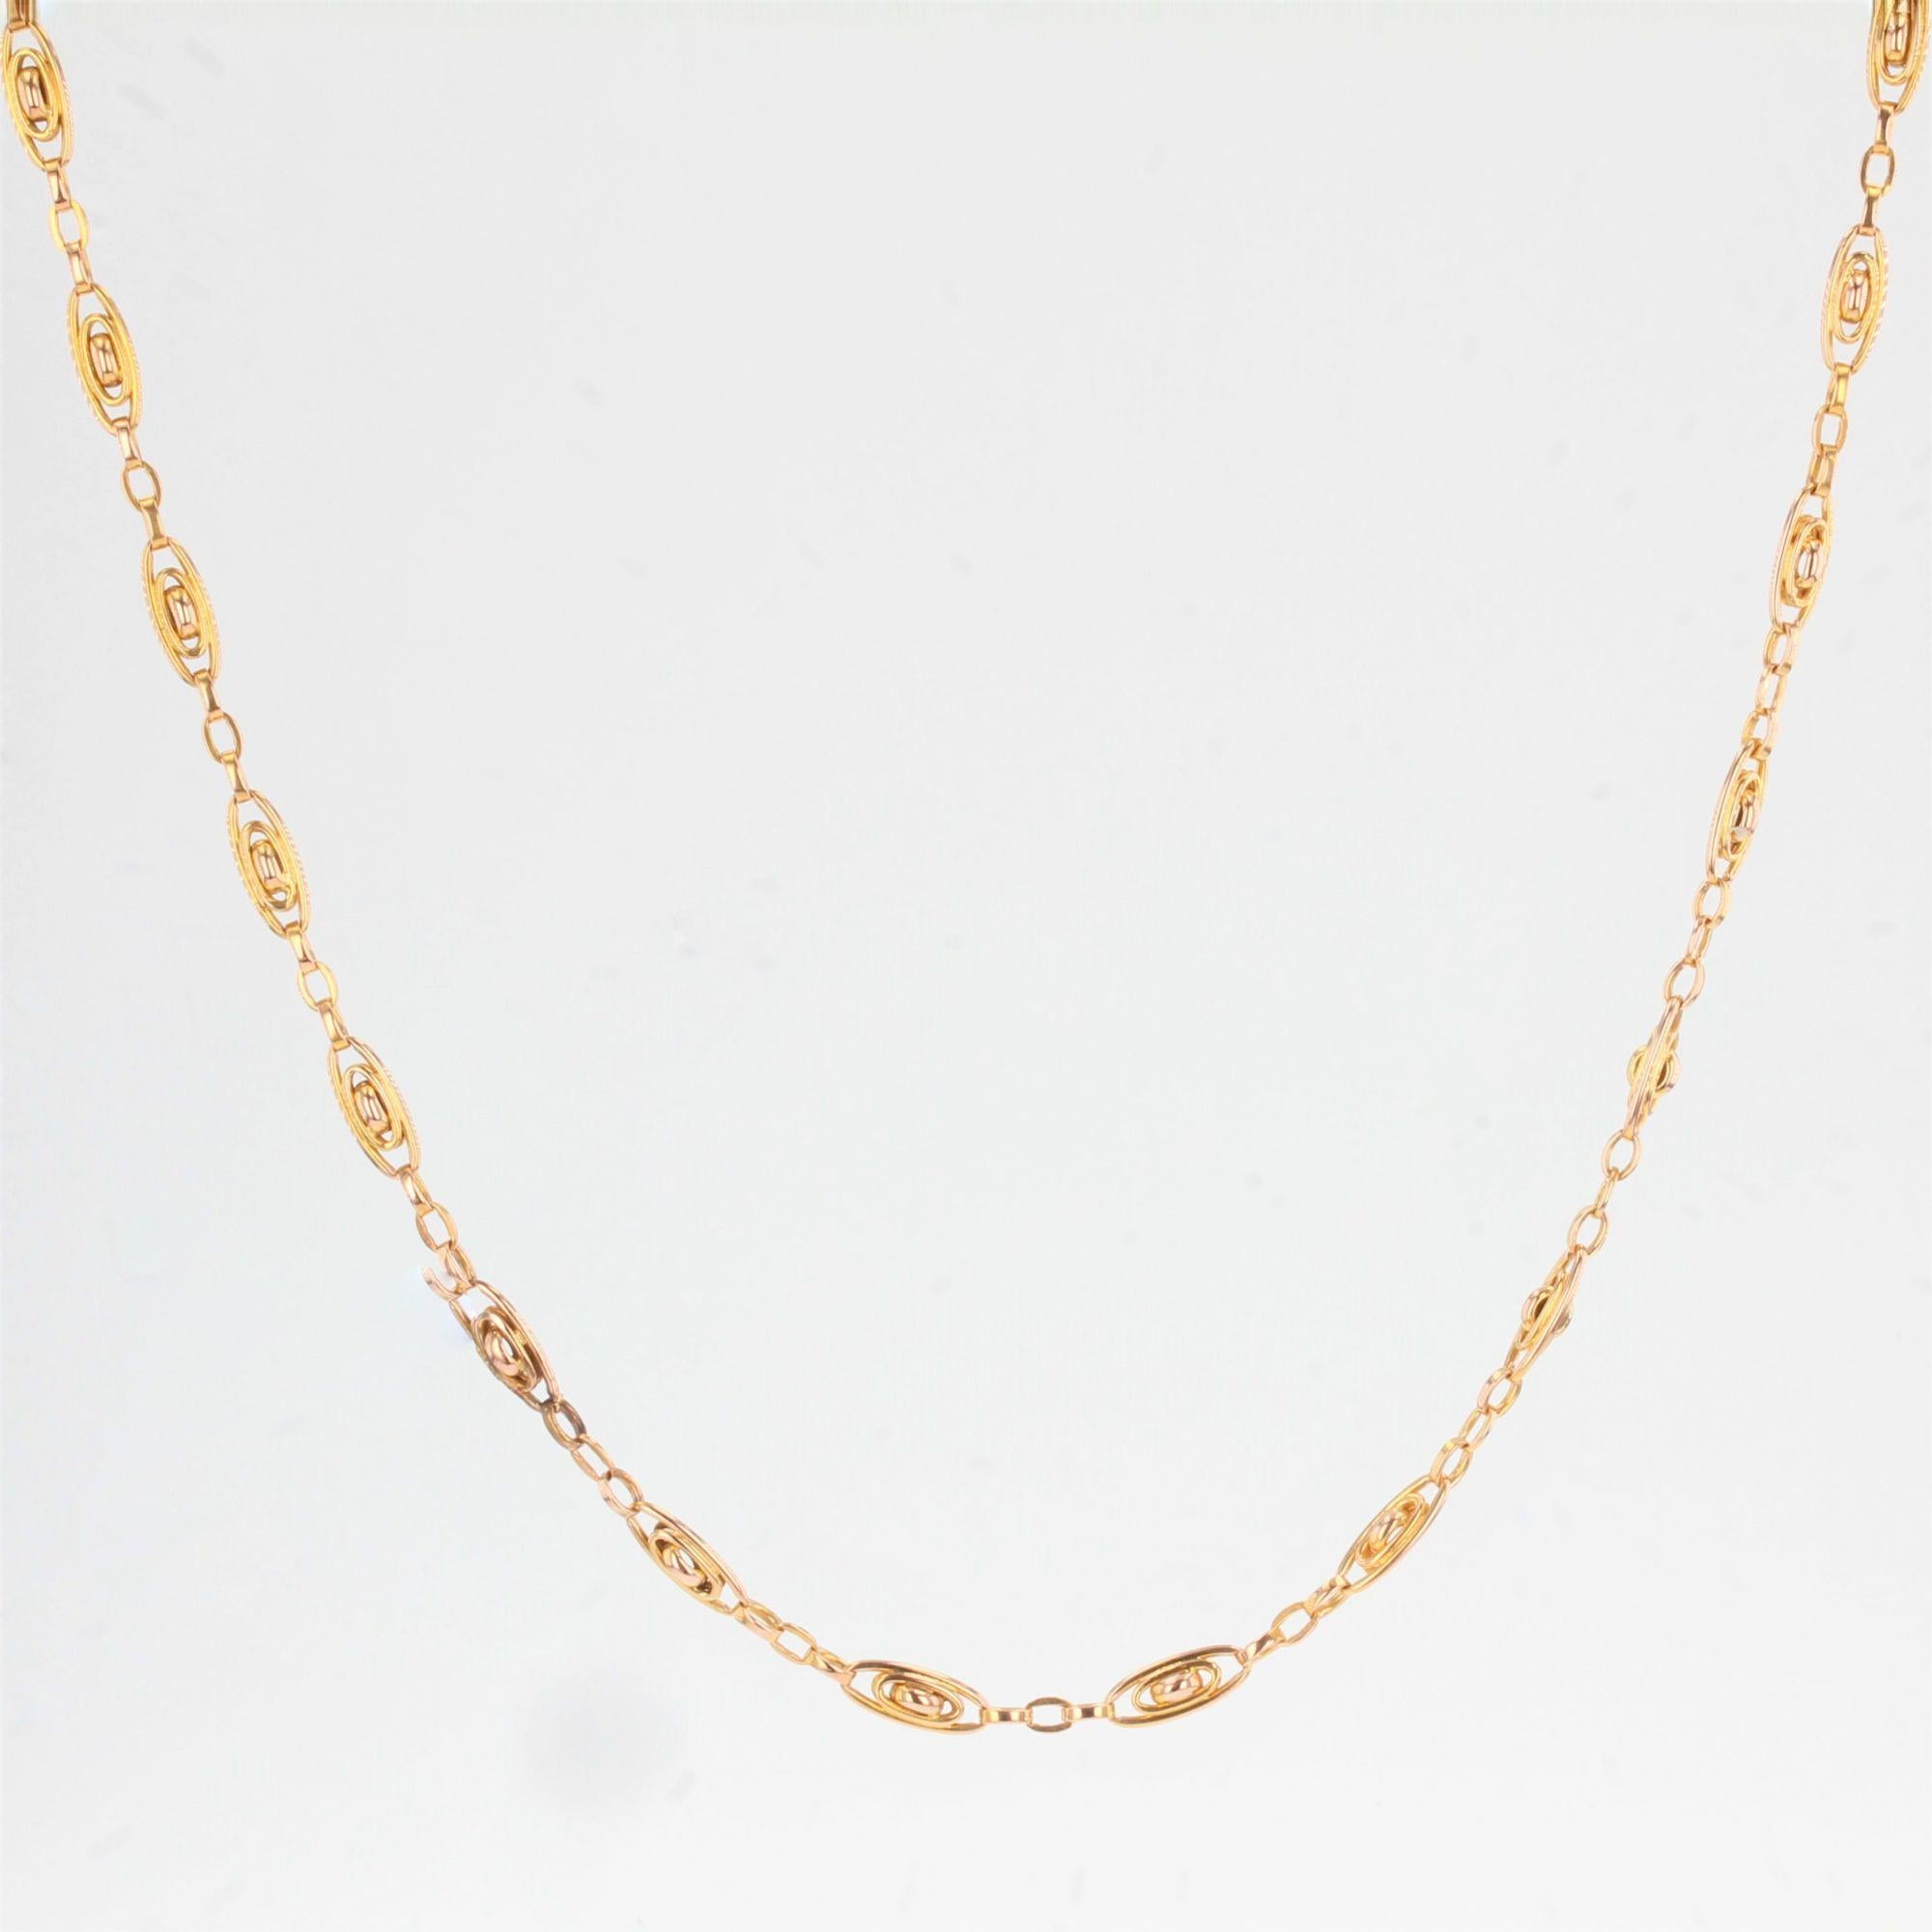 French 19th Century 18 Karat Rose Gold Watch Chain Necklace For Sale 4